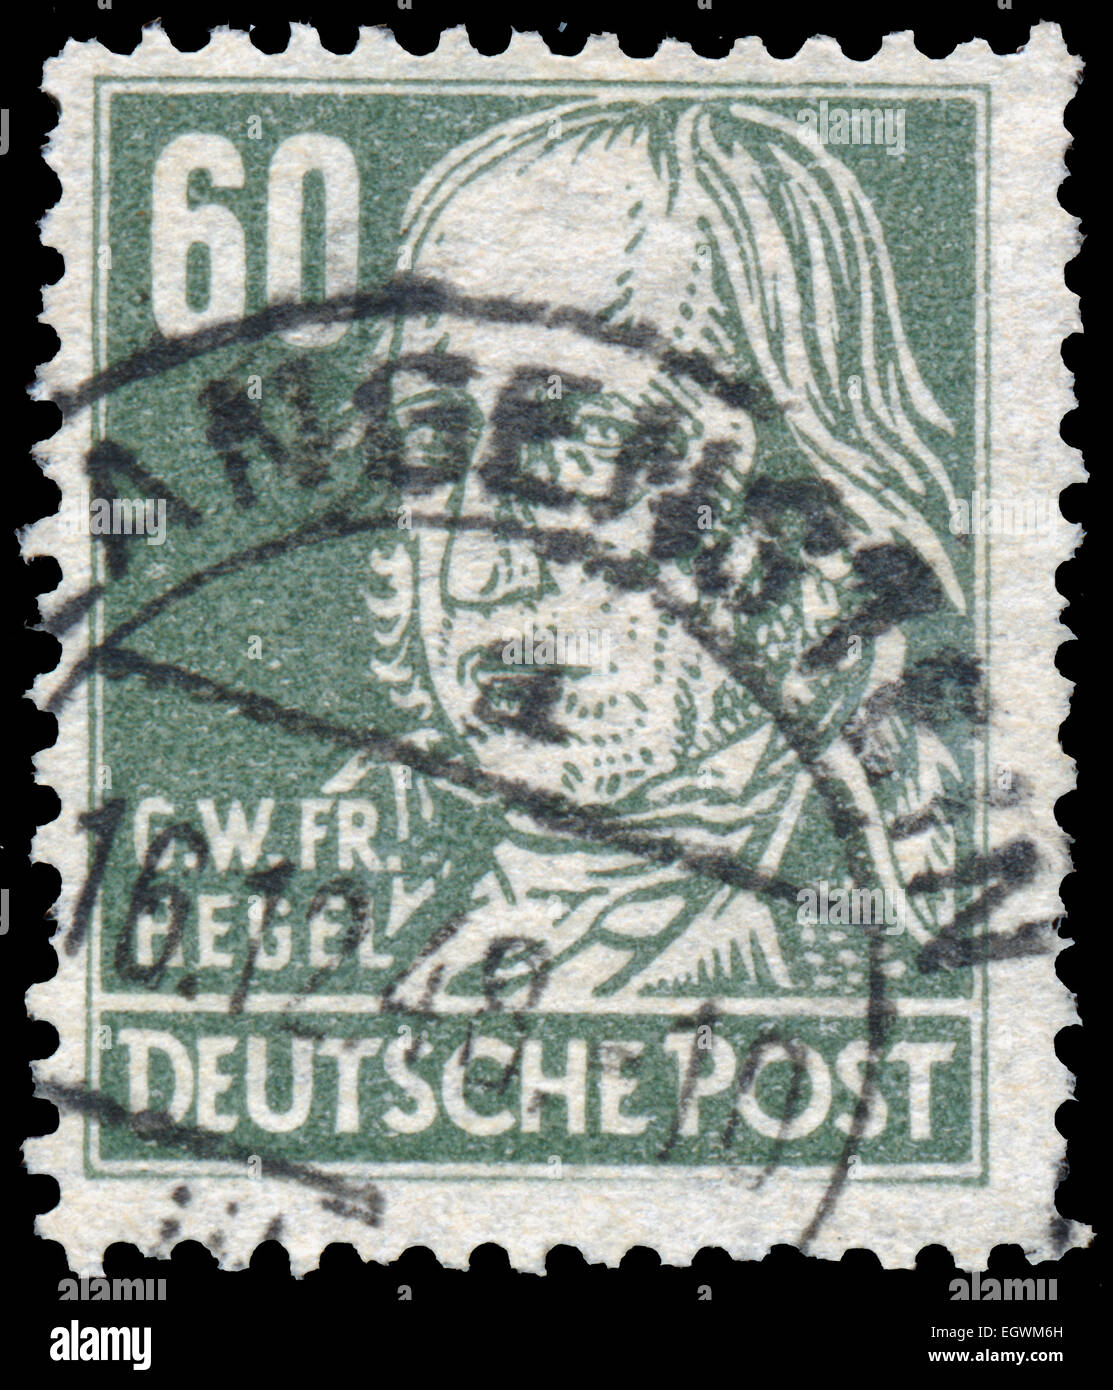 GERMANY - CIRCA 1952: Stamp printed in Germany shows portrait of Georg Wilhelm Friedrich Hegel (German philosopher), with the sa Stock Photo